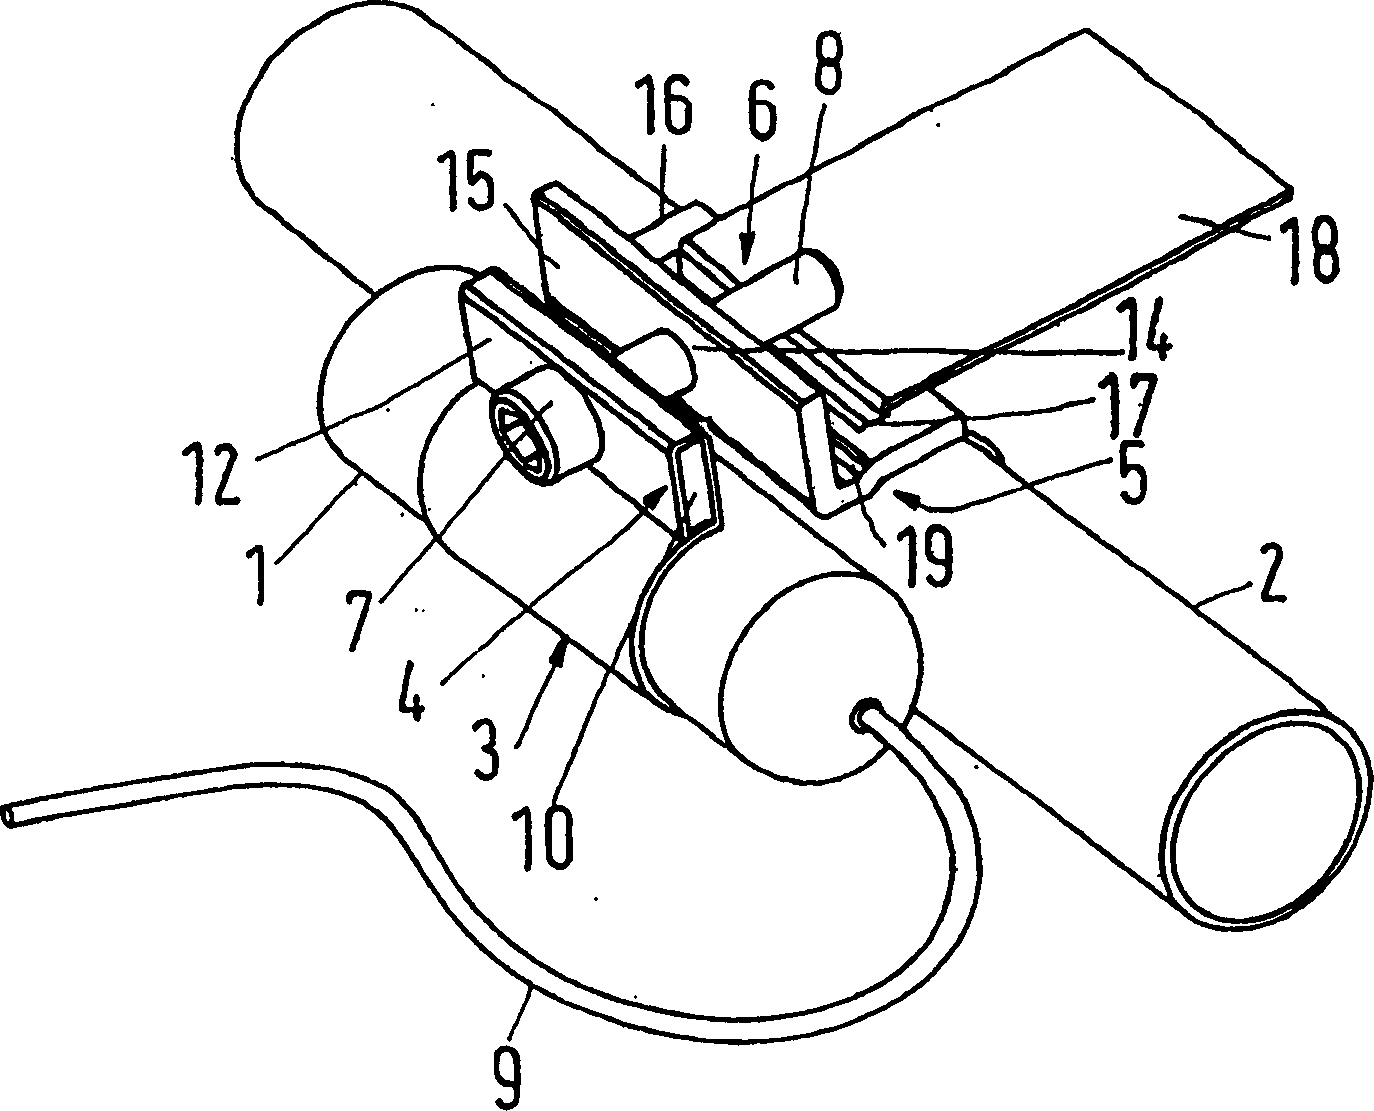 Clamp capable of axial parallelly connecting cylinder shape temp sensor with pipe